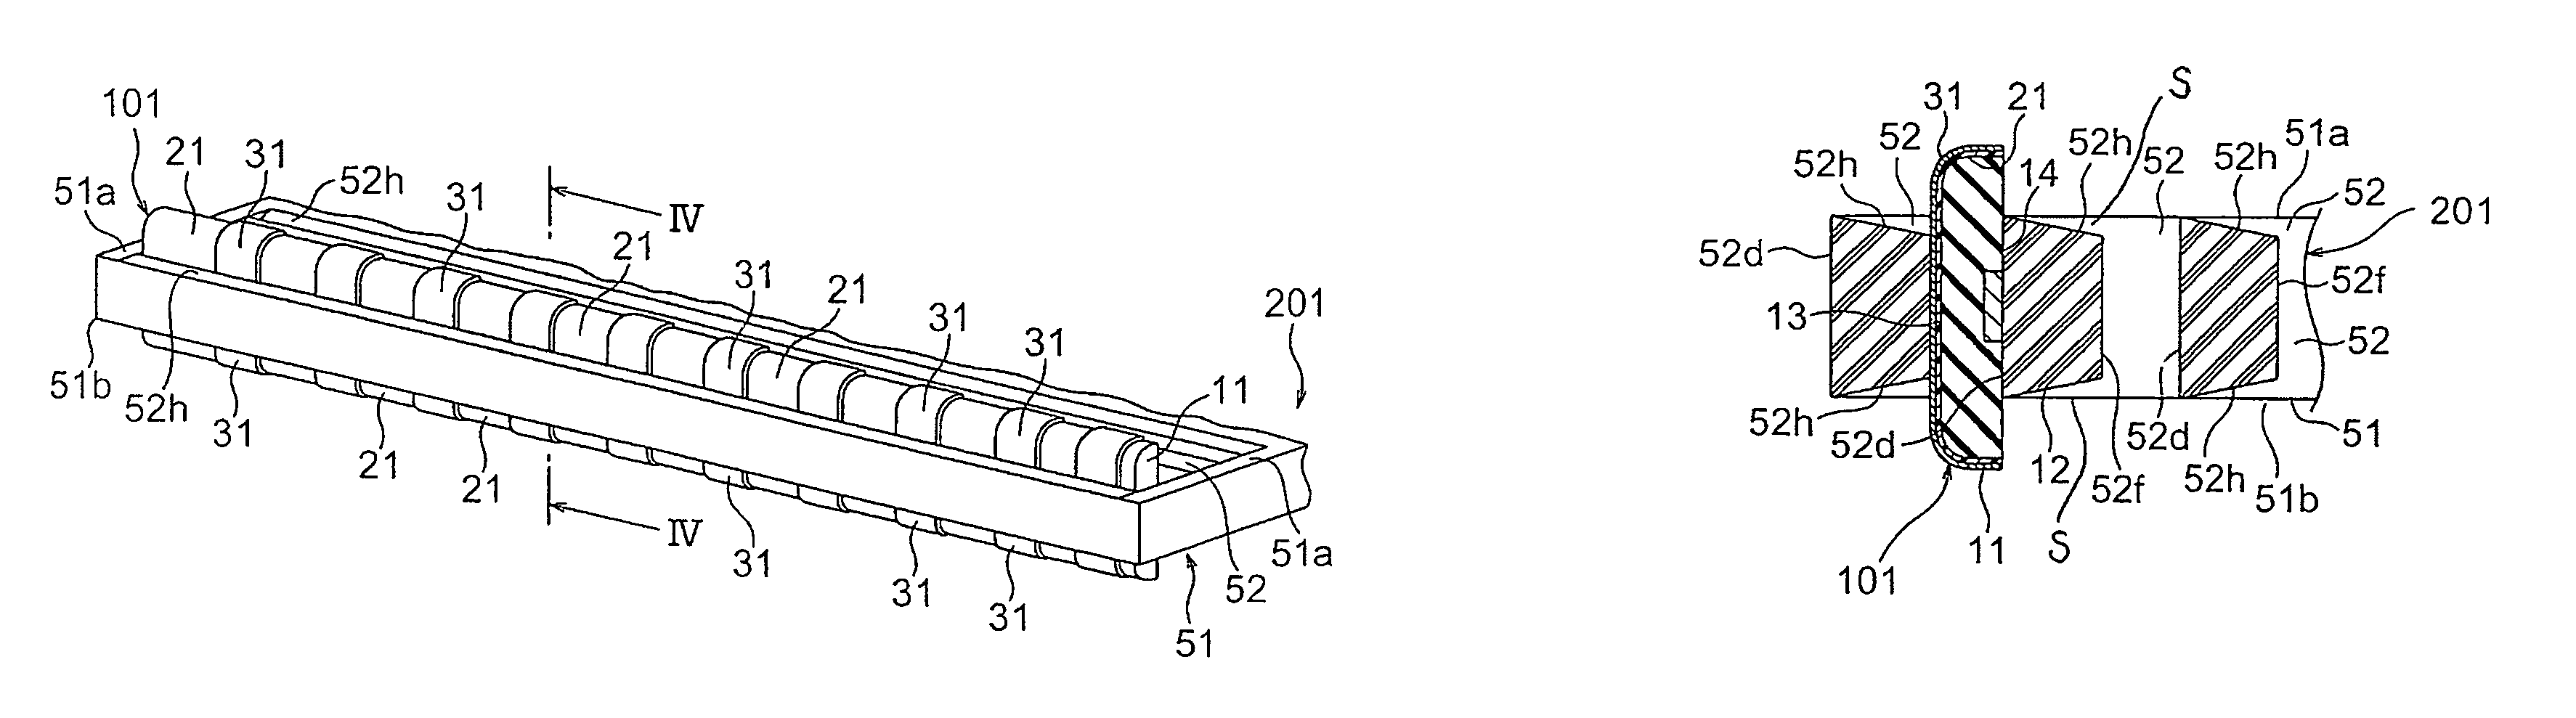 Electrical connector having a space allowing an elastic connecting member to be escaped